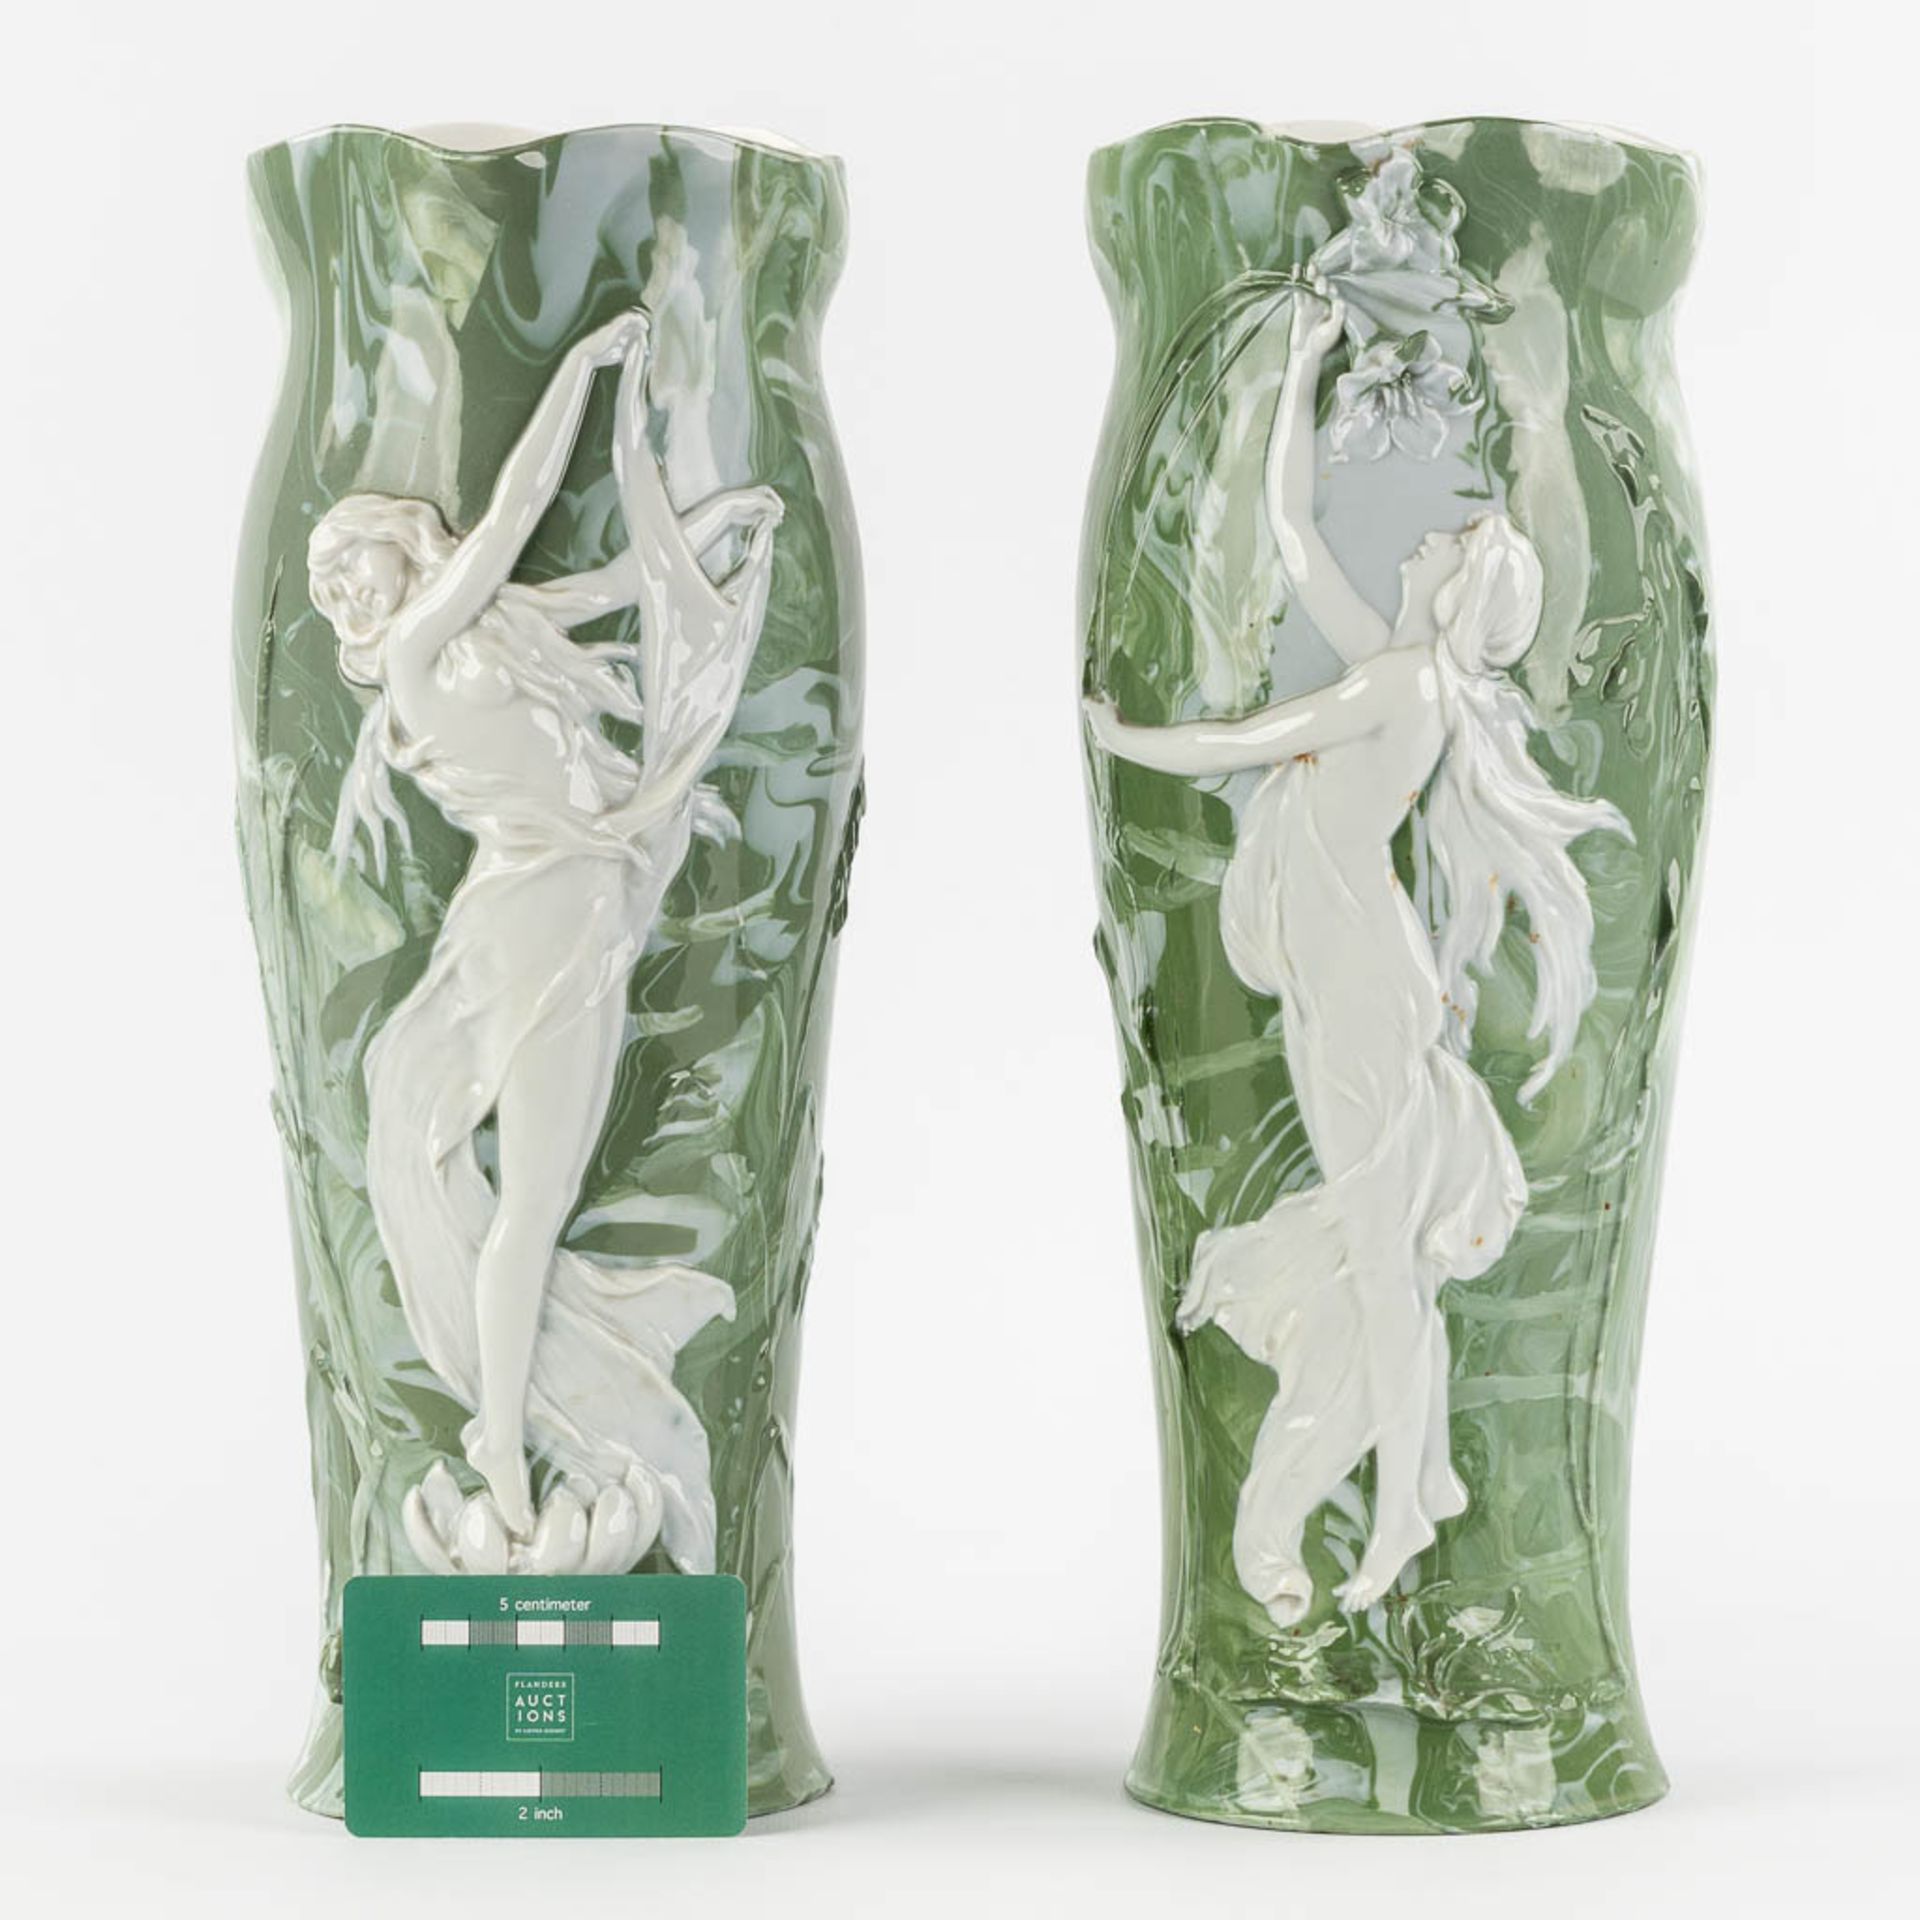 Attributed to Adolf OPPEL (1840-1923) 'Vases with Ladies' Art Nouveau. (L:13 x W:15 x H:36 cm) - Image 2 of 13